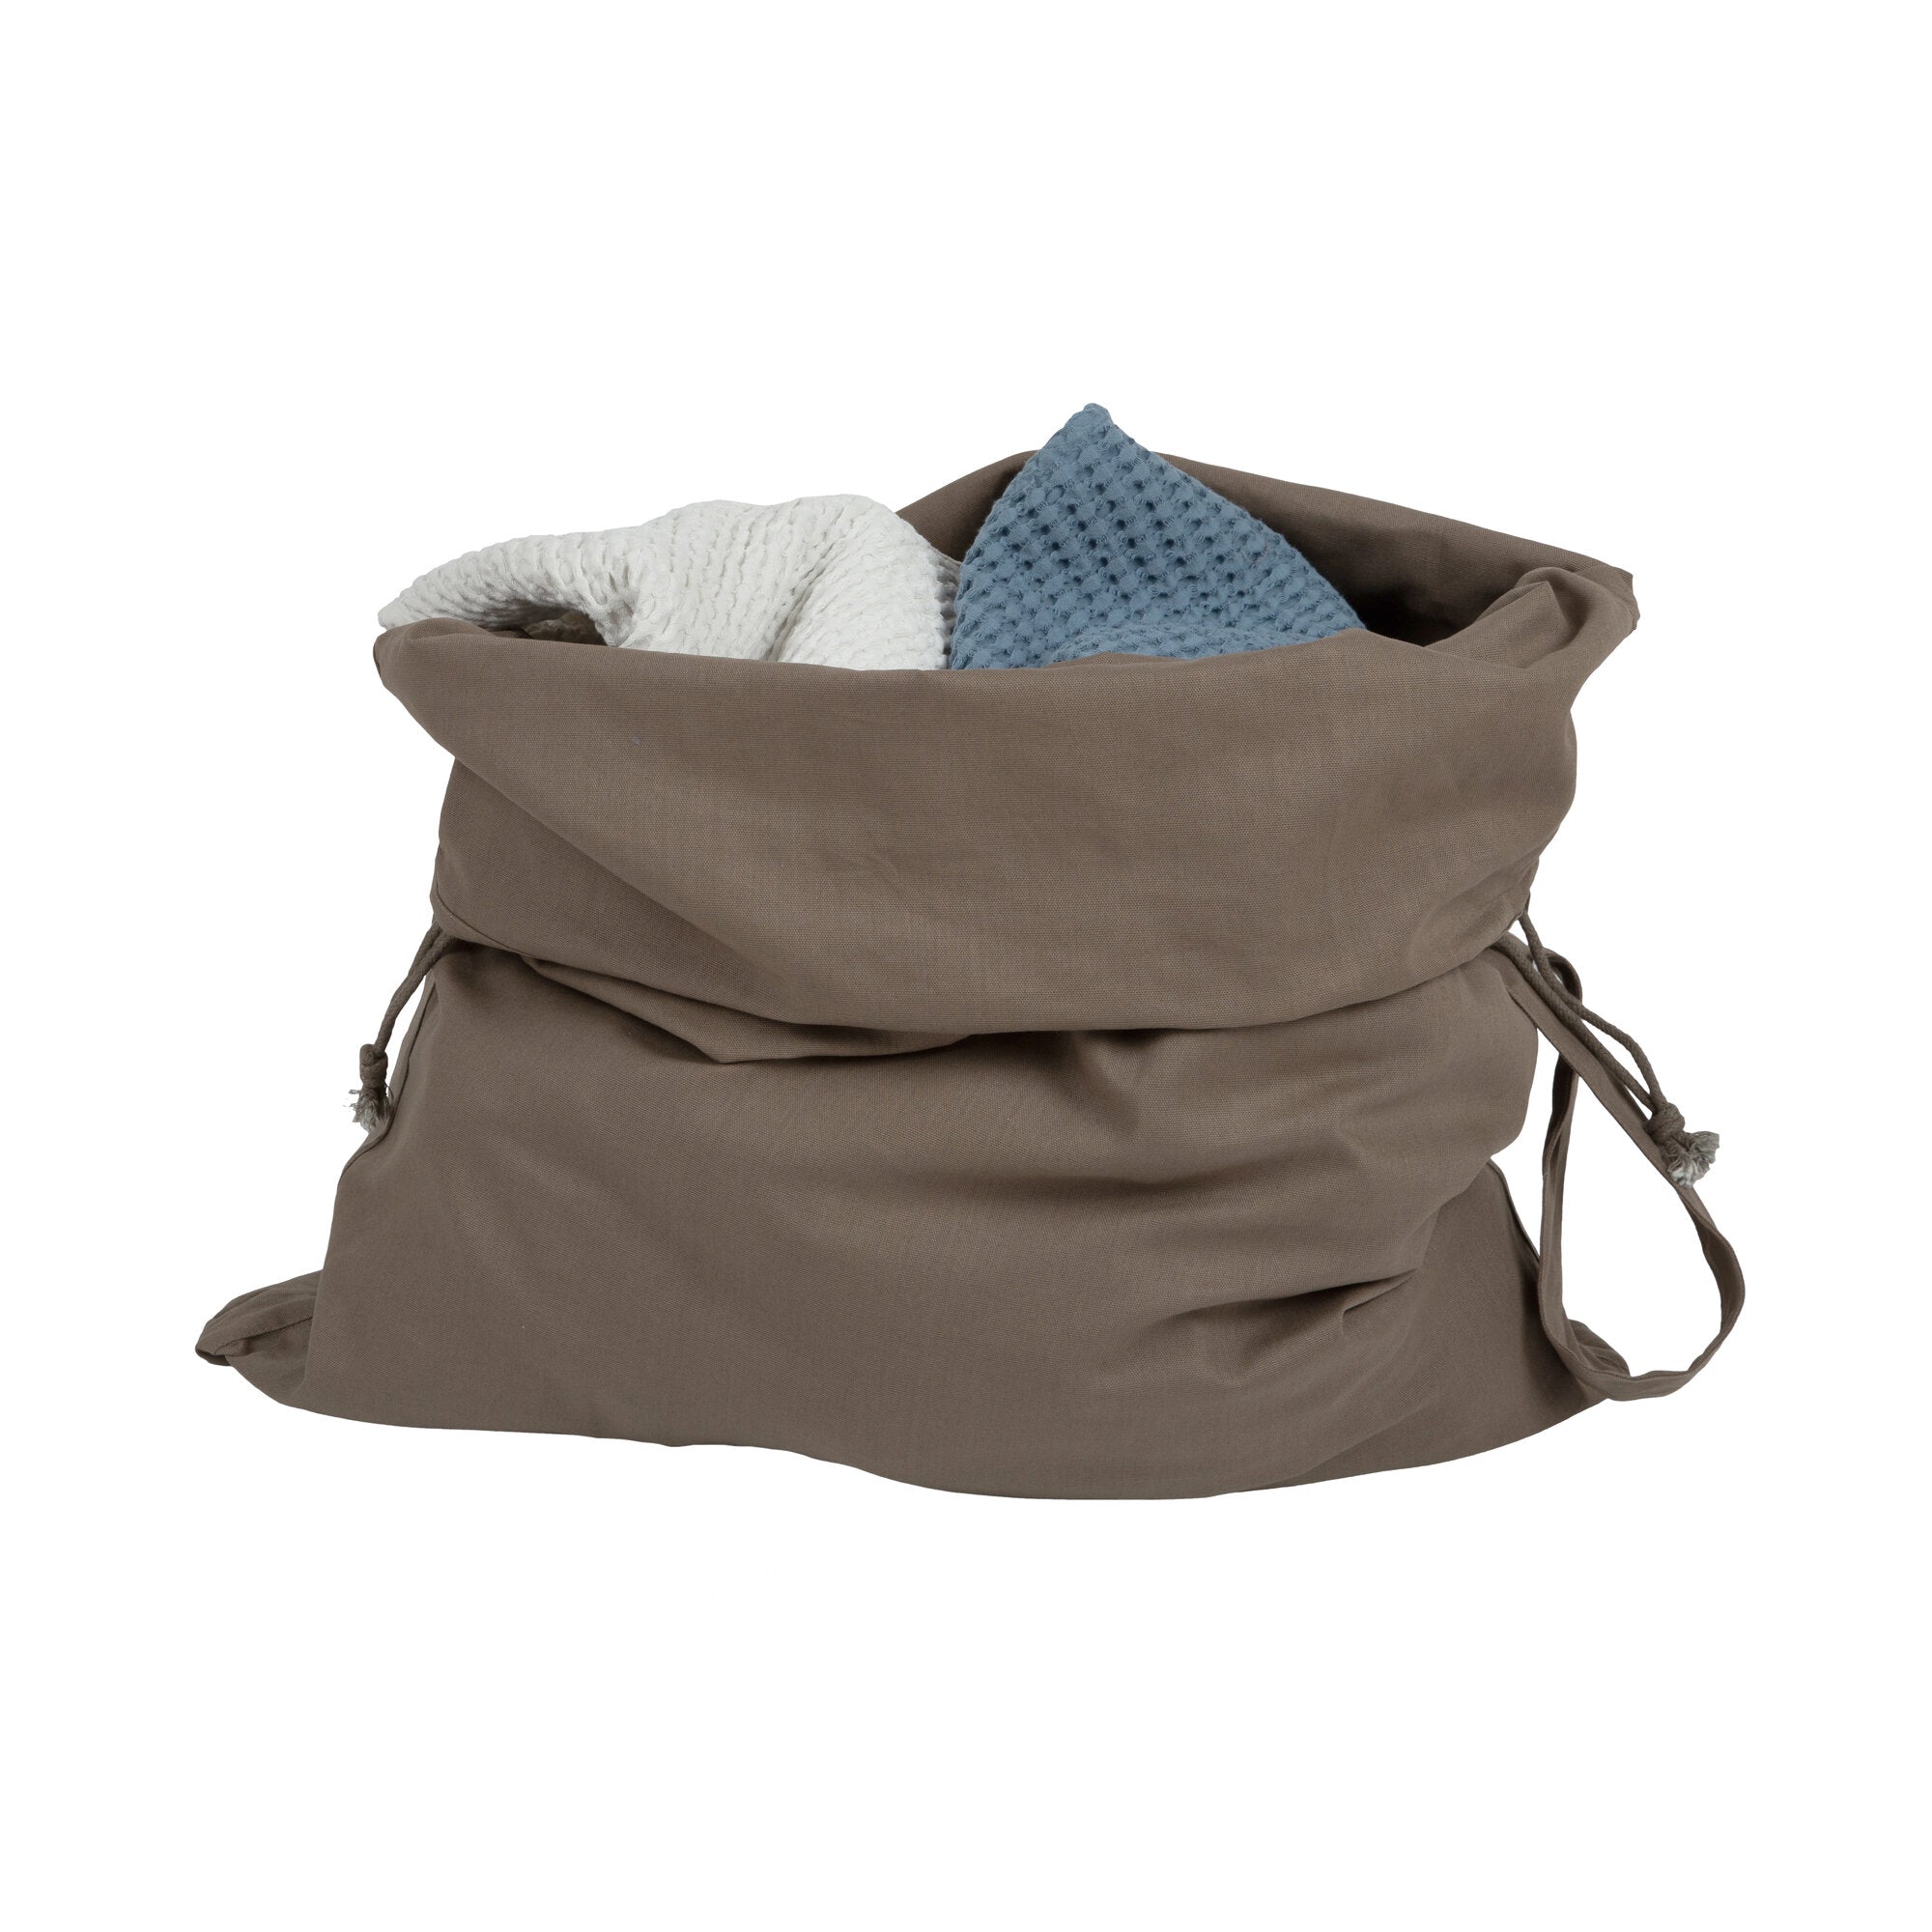 The Organic Company Laundry And Storage Bag, Clay